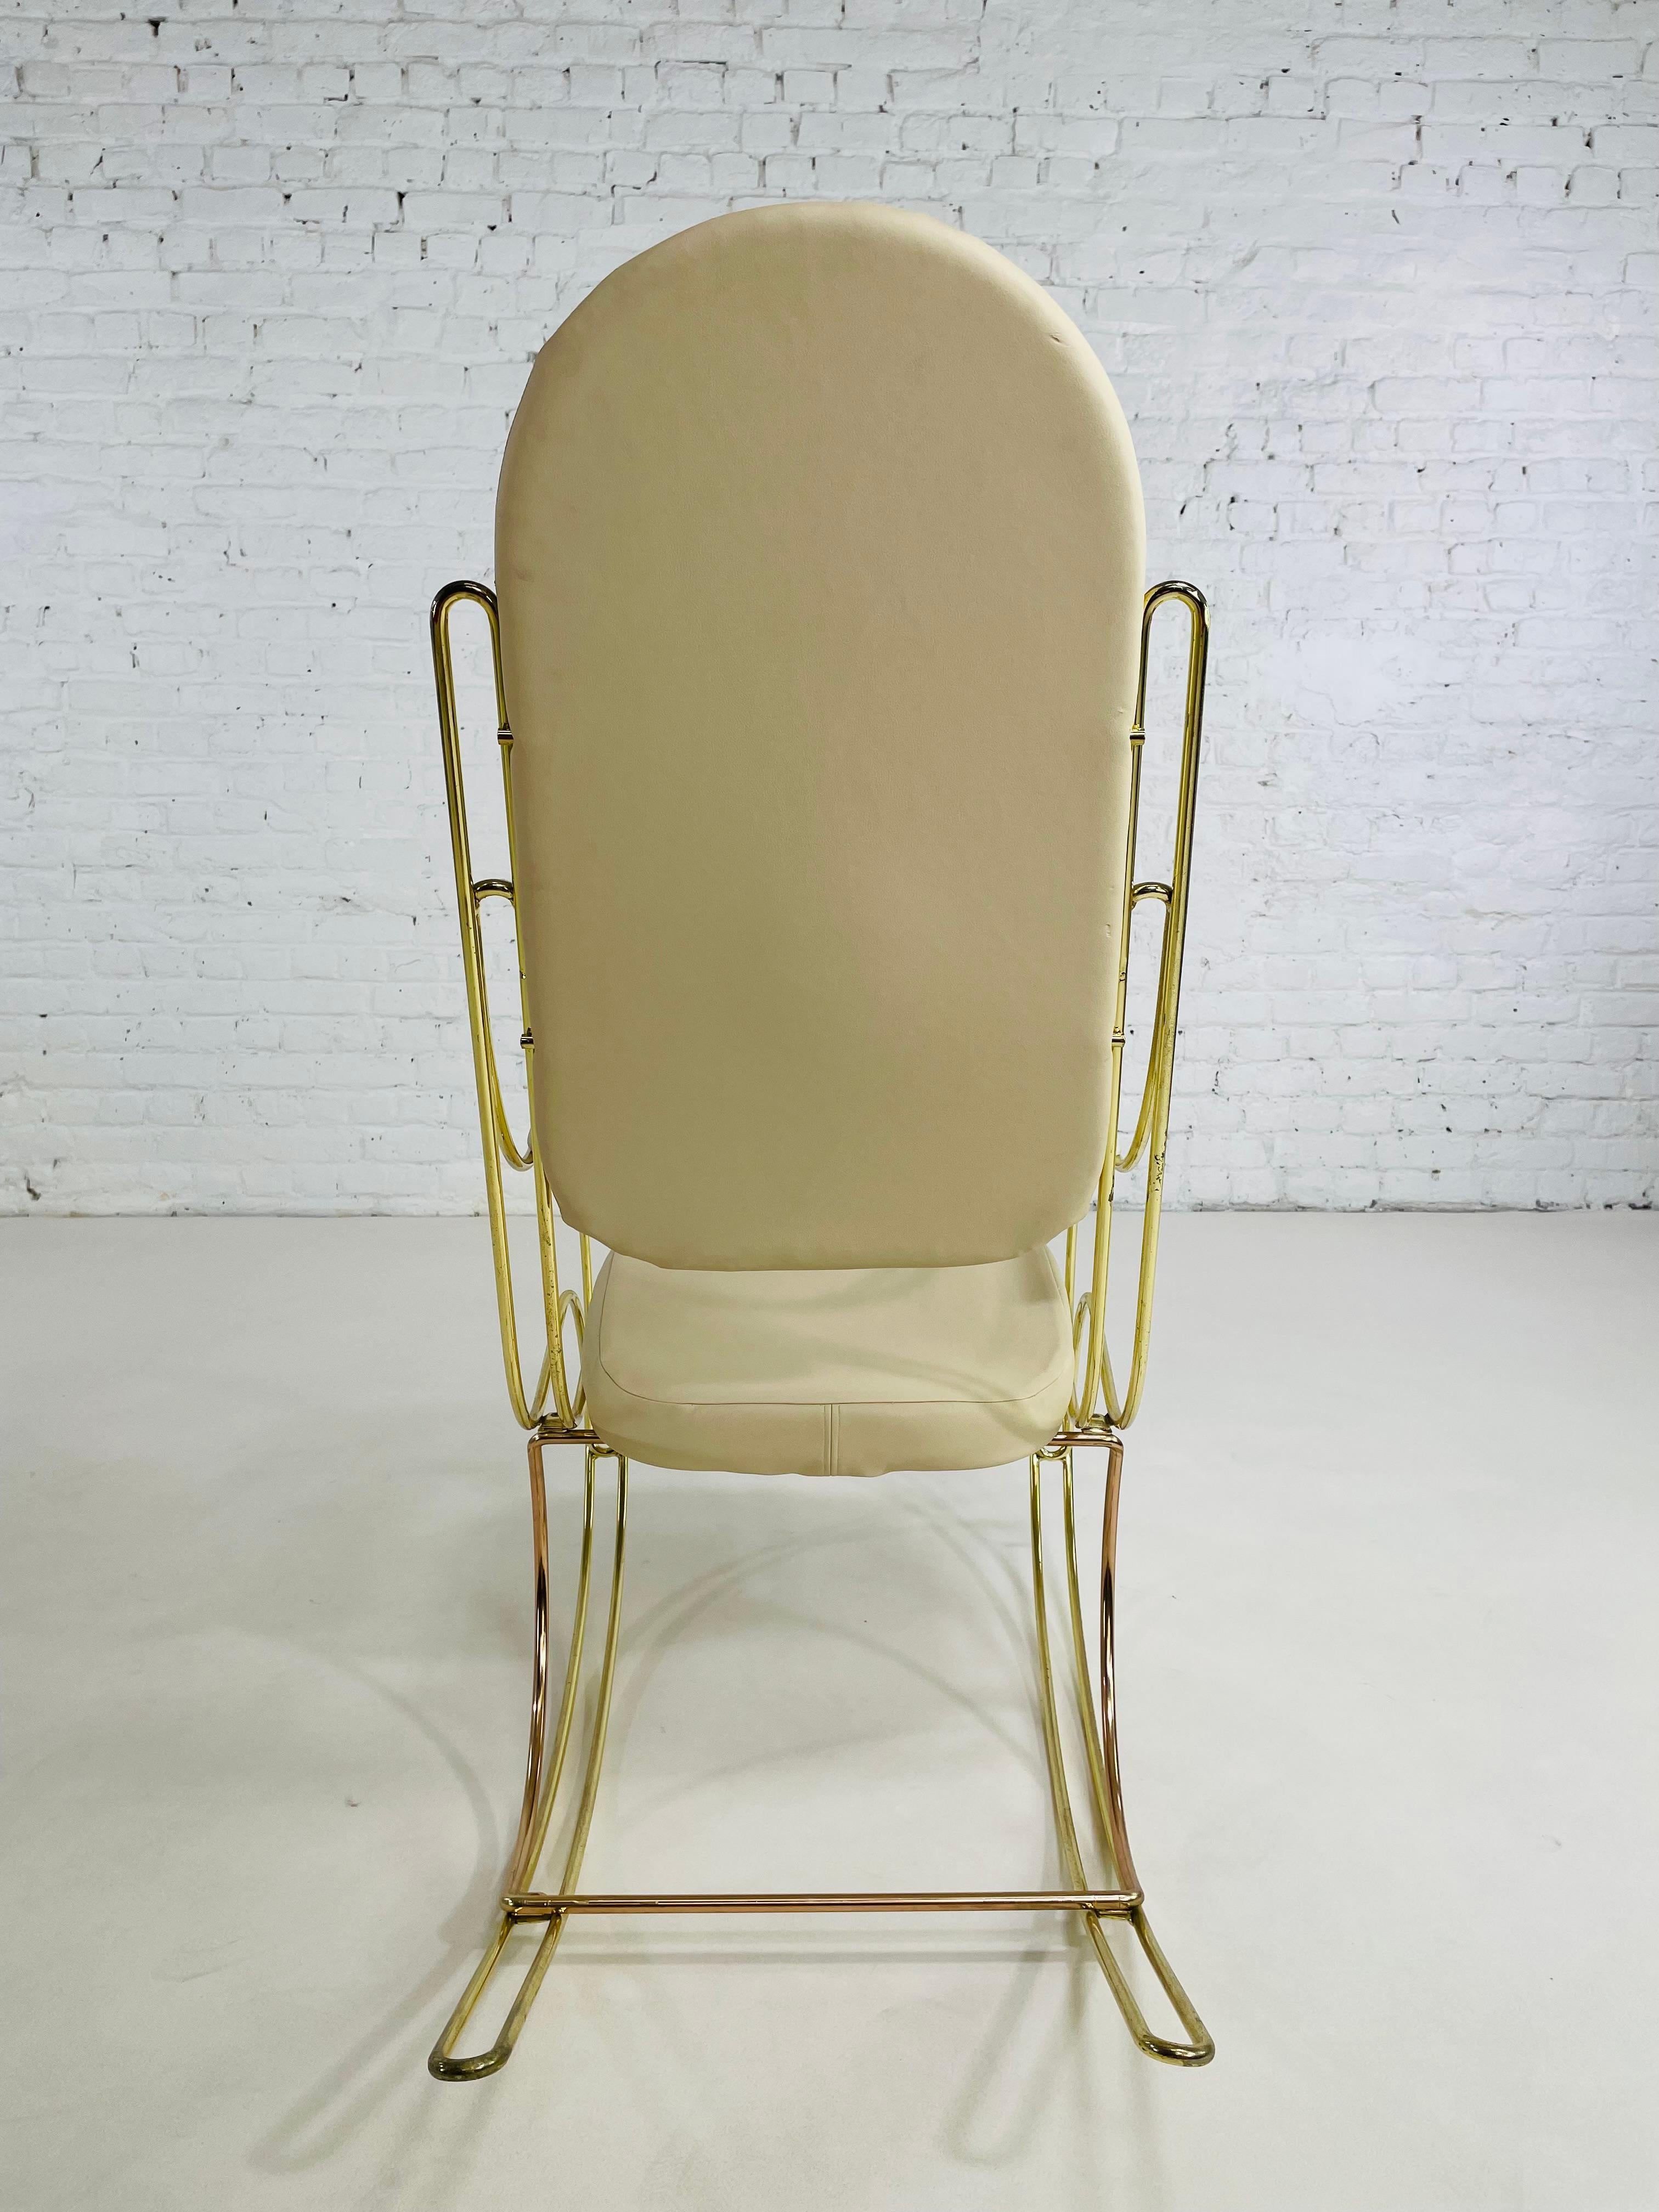 1960s-1970s Brass And Beige Faux Leather Rocking Chair For Sale 4